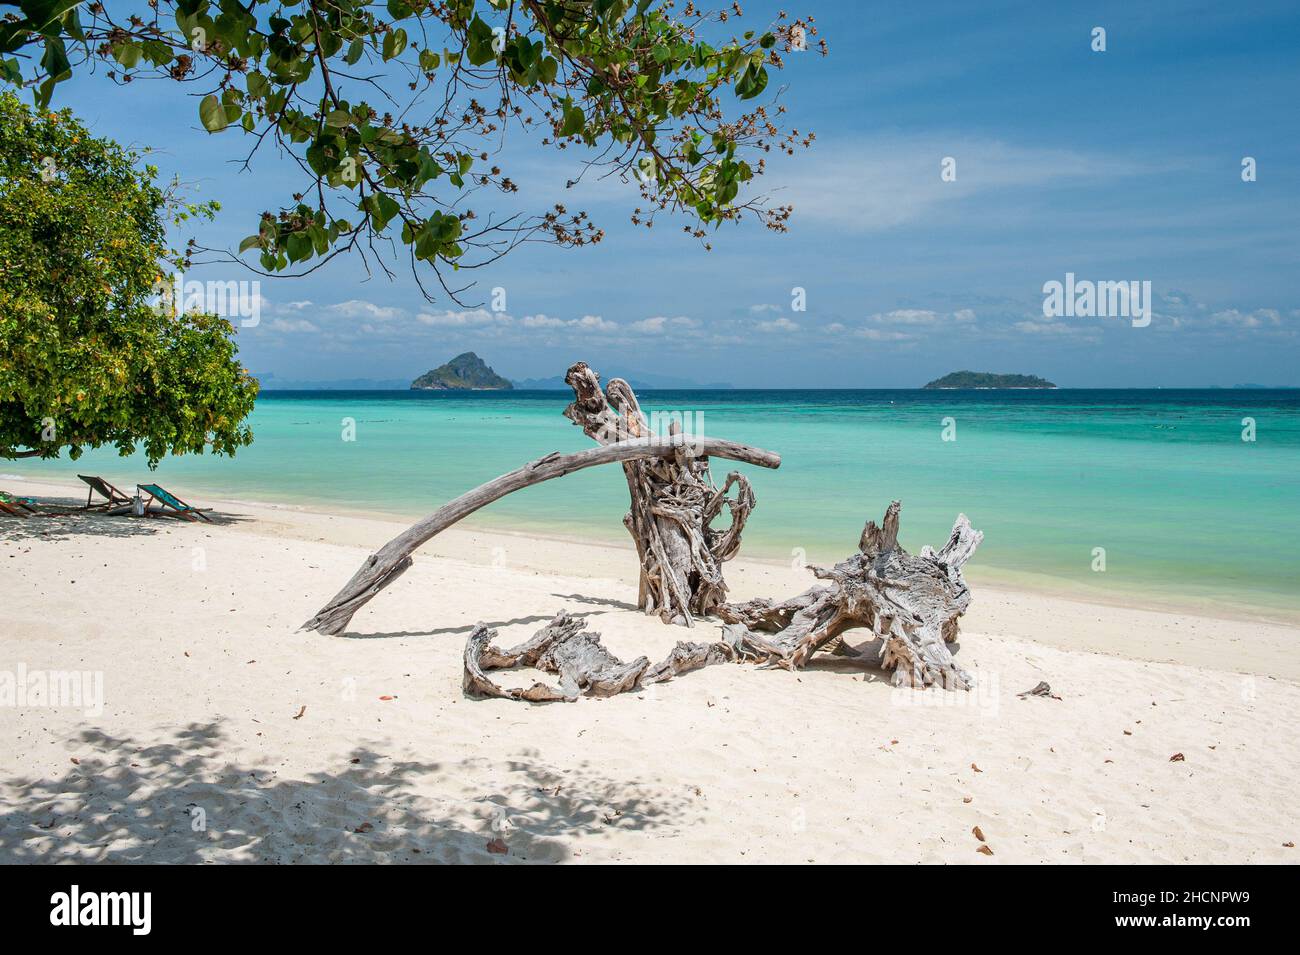 Laem Tong Beach at Phi Phi Islands. These tropical islands are a popular tour destination from Phuket and Krabi in Thailand. Stock Photo